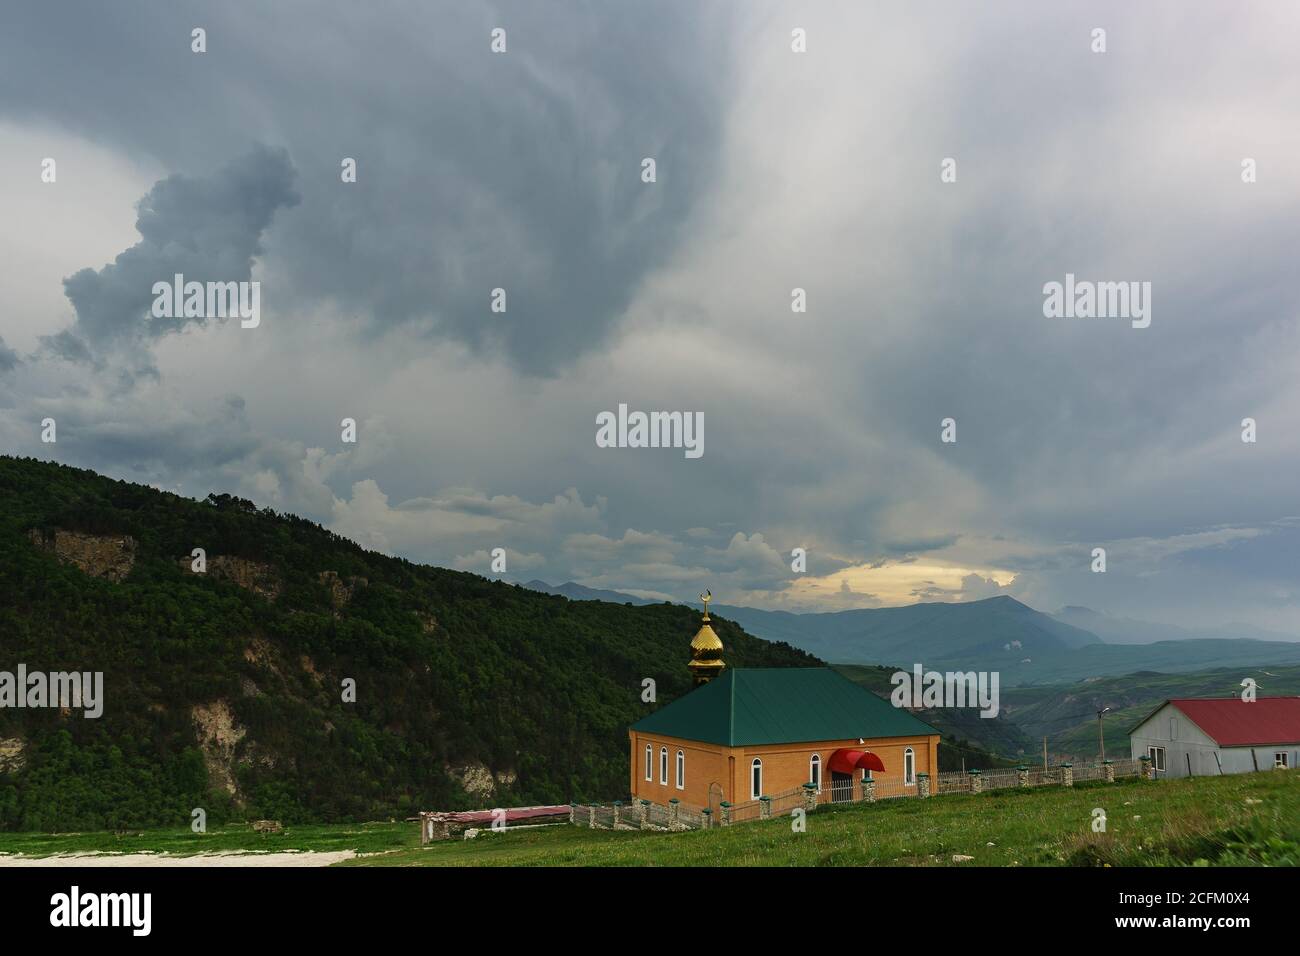 Hoi, Vedeno district, Chechen Republic, Russia - June 01.2019: New modern mosque in reviving the settlements guards. Cloudy day in the Caucasus mounta Stock Photo